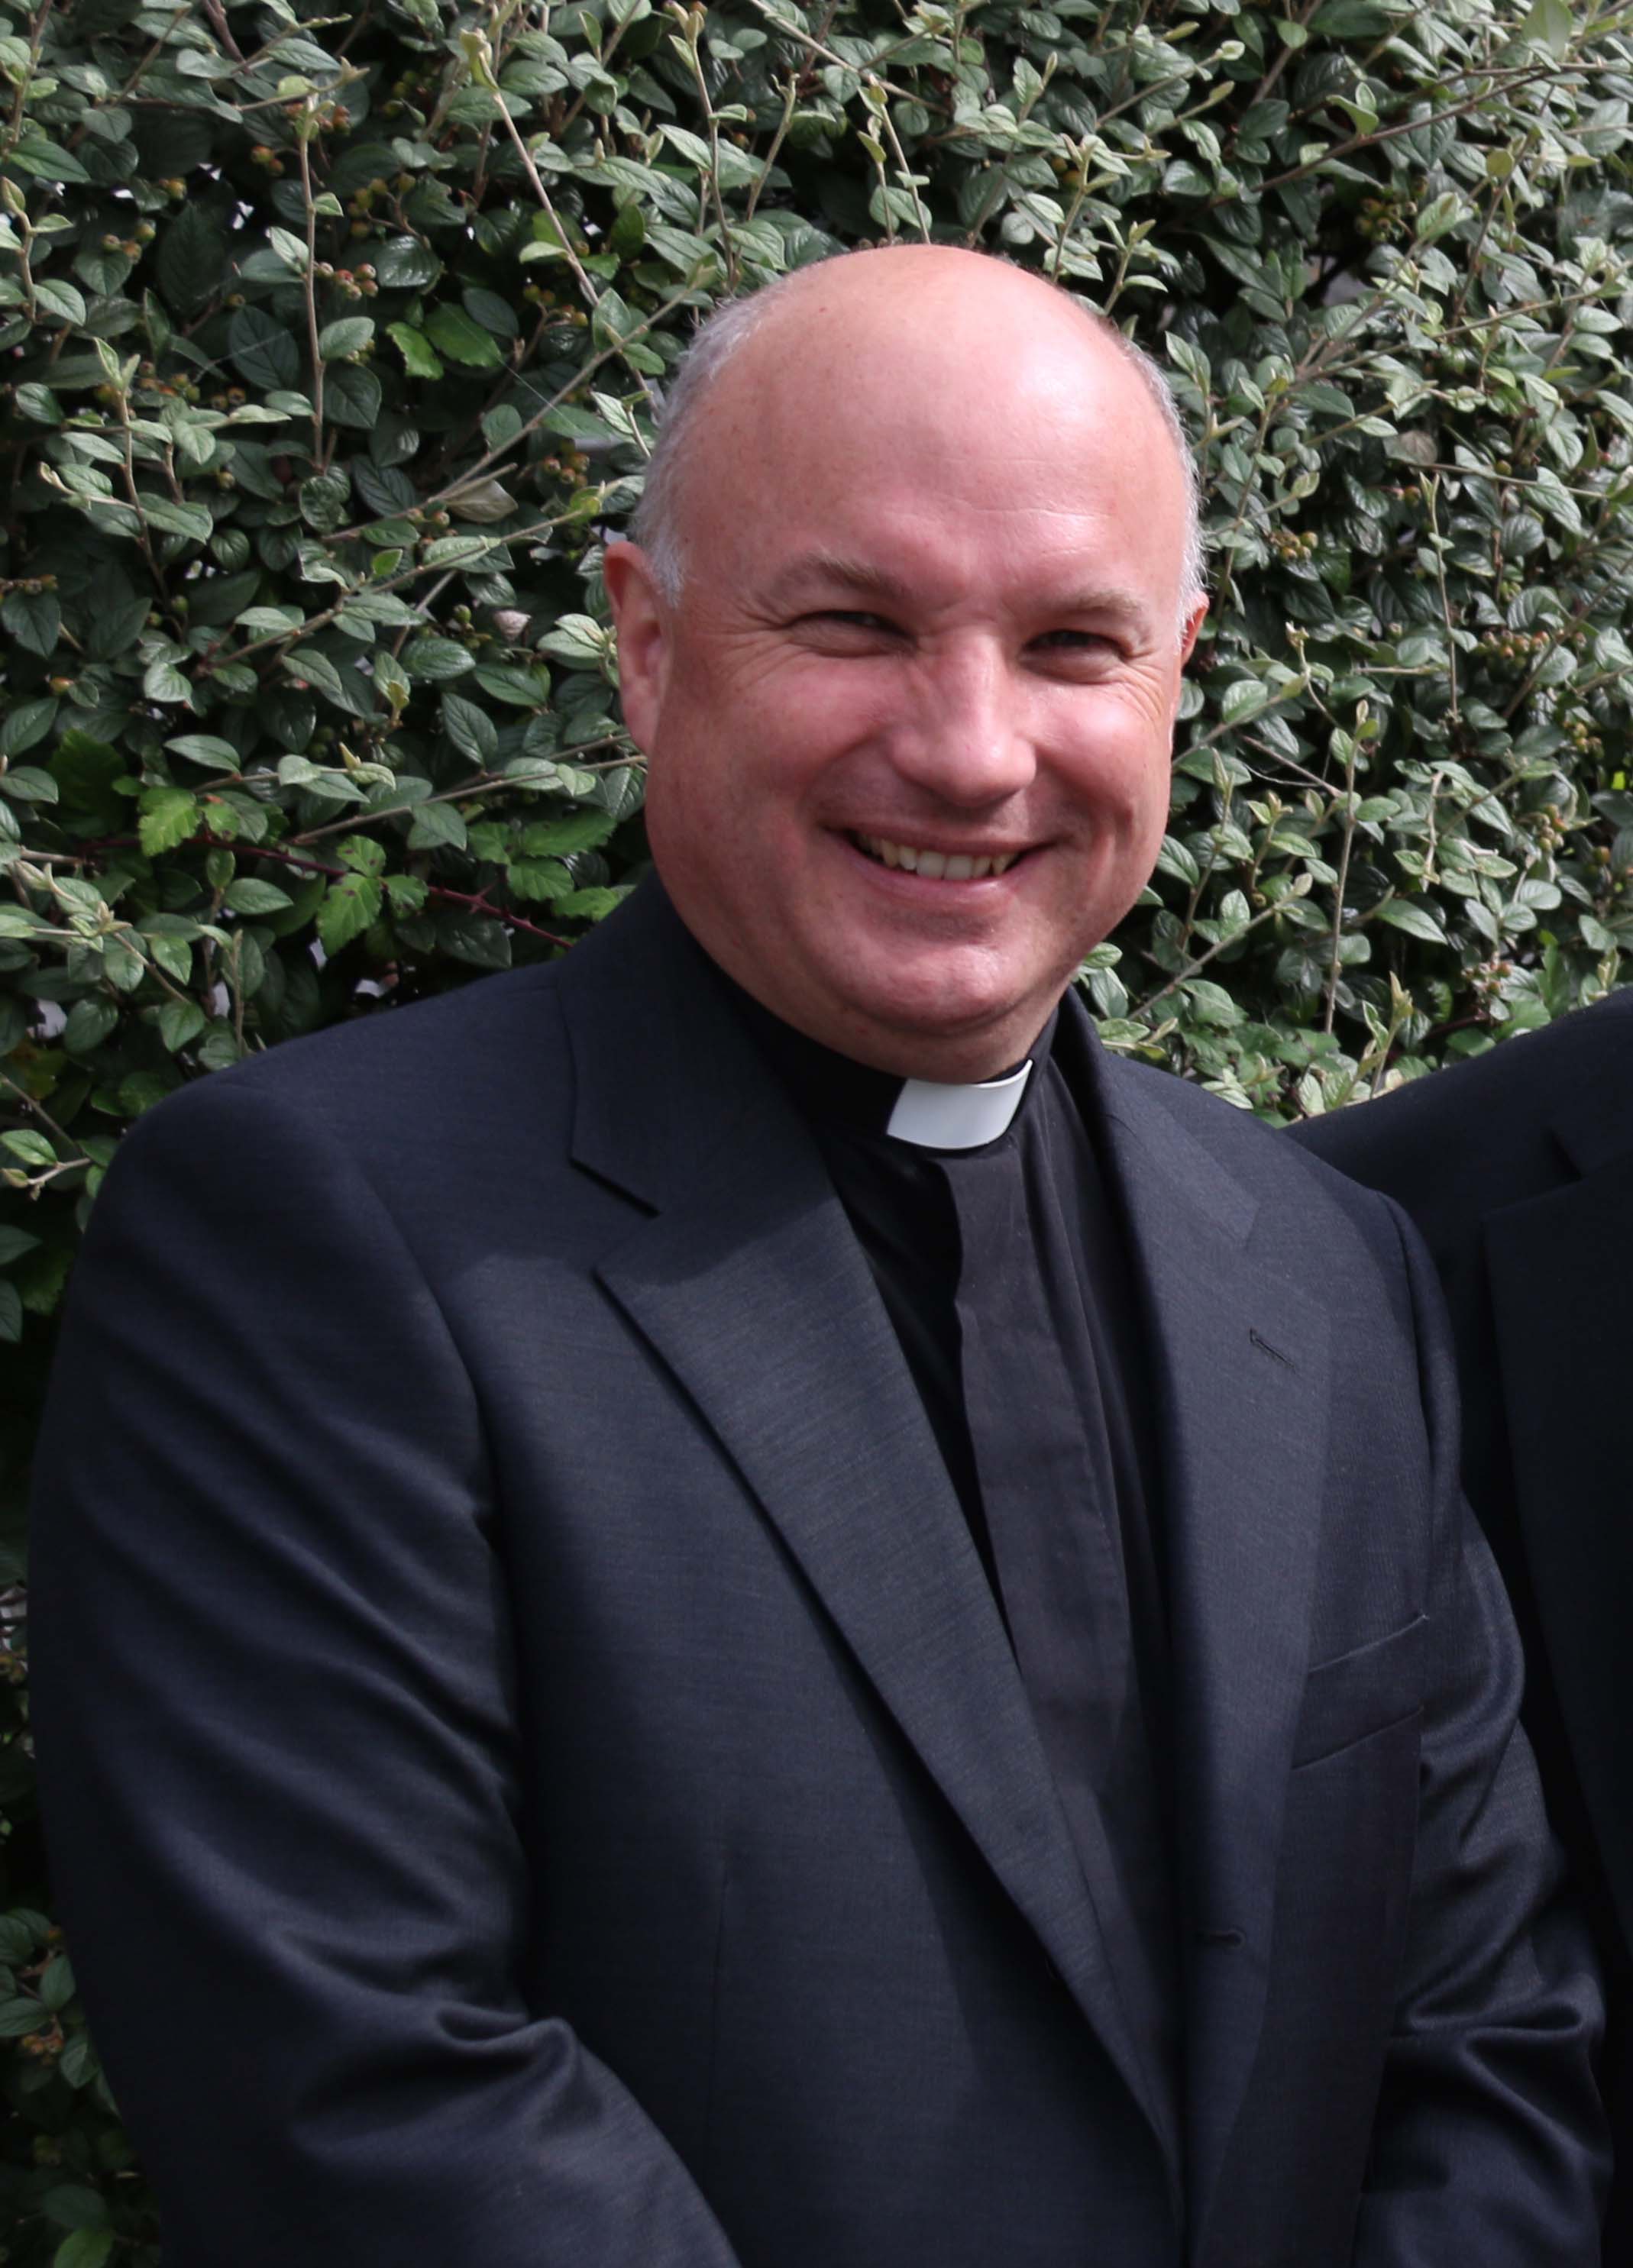 The Rt Revd Adrian Wilkinson, Bishop of Cashel, Ferns and Ossory.